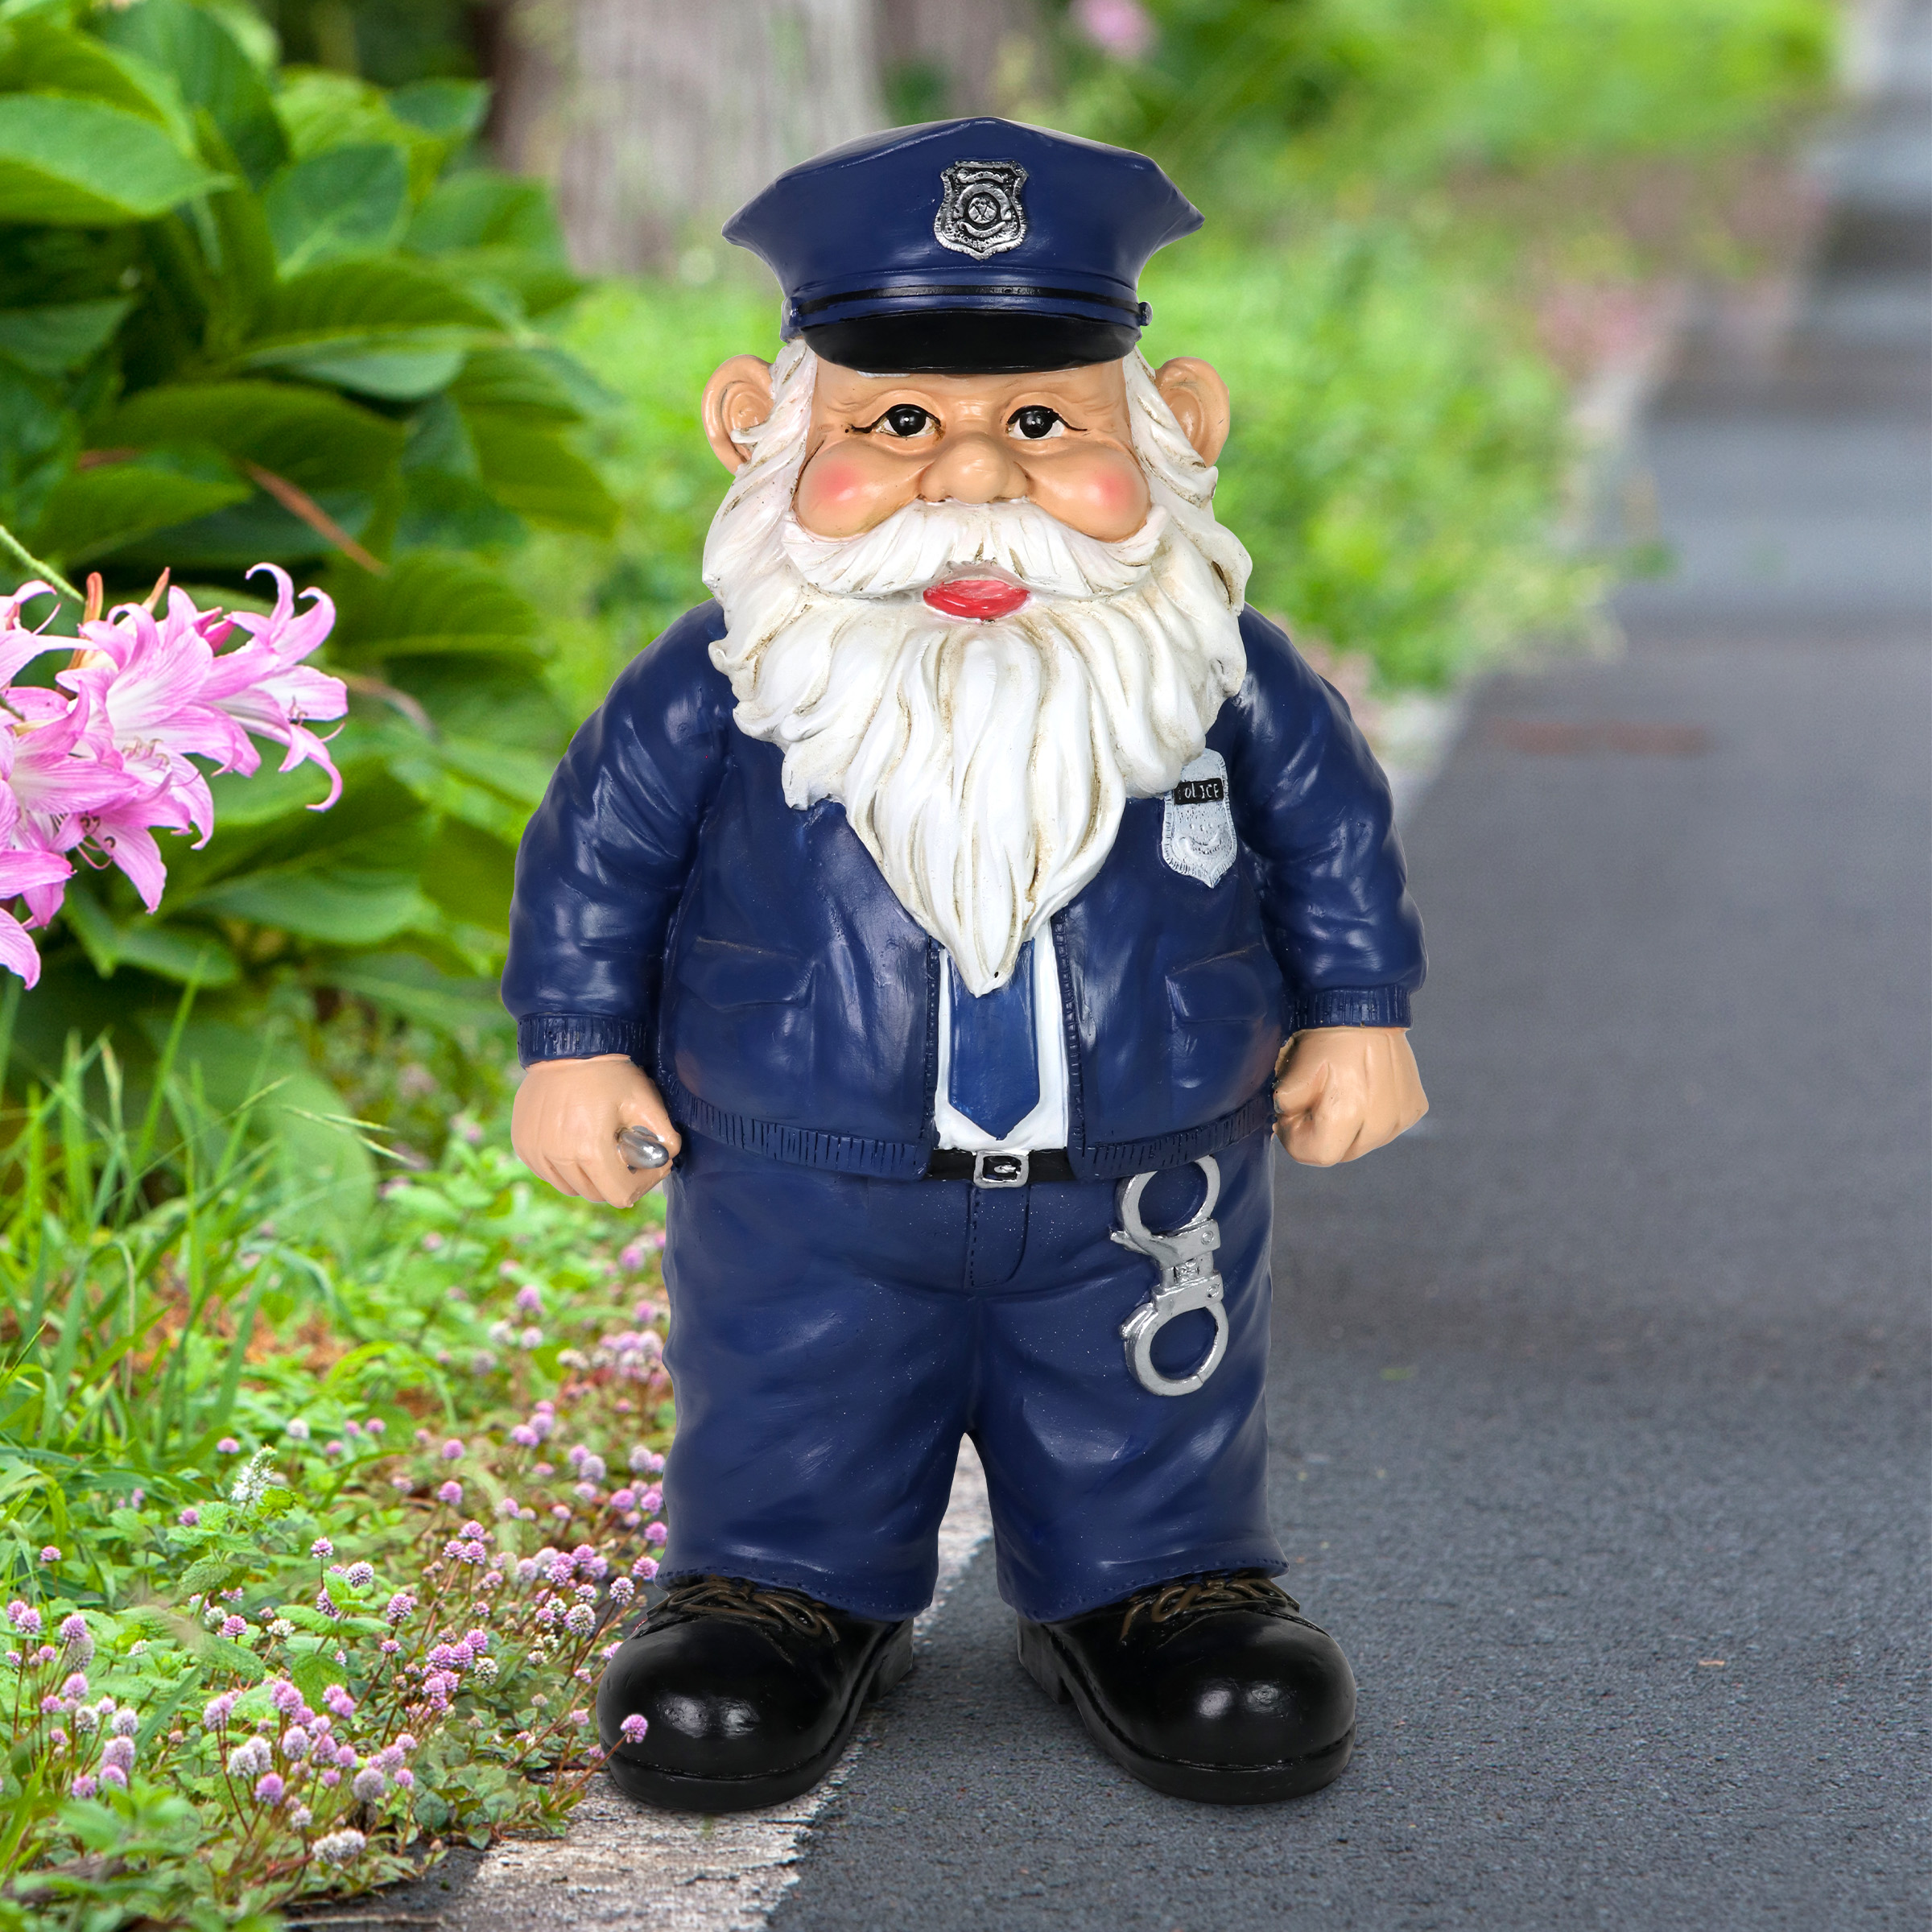 Exhart Policeman Gnome Statuary, 7.5 by 13 inches, Resin, Multicolor - image 3 of 7